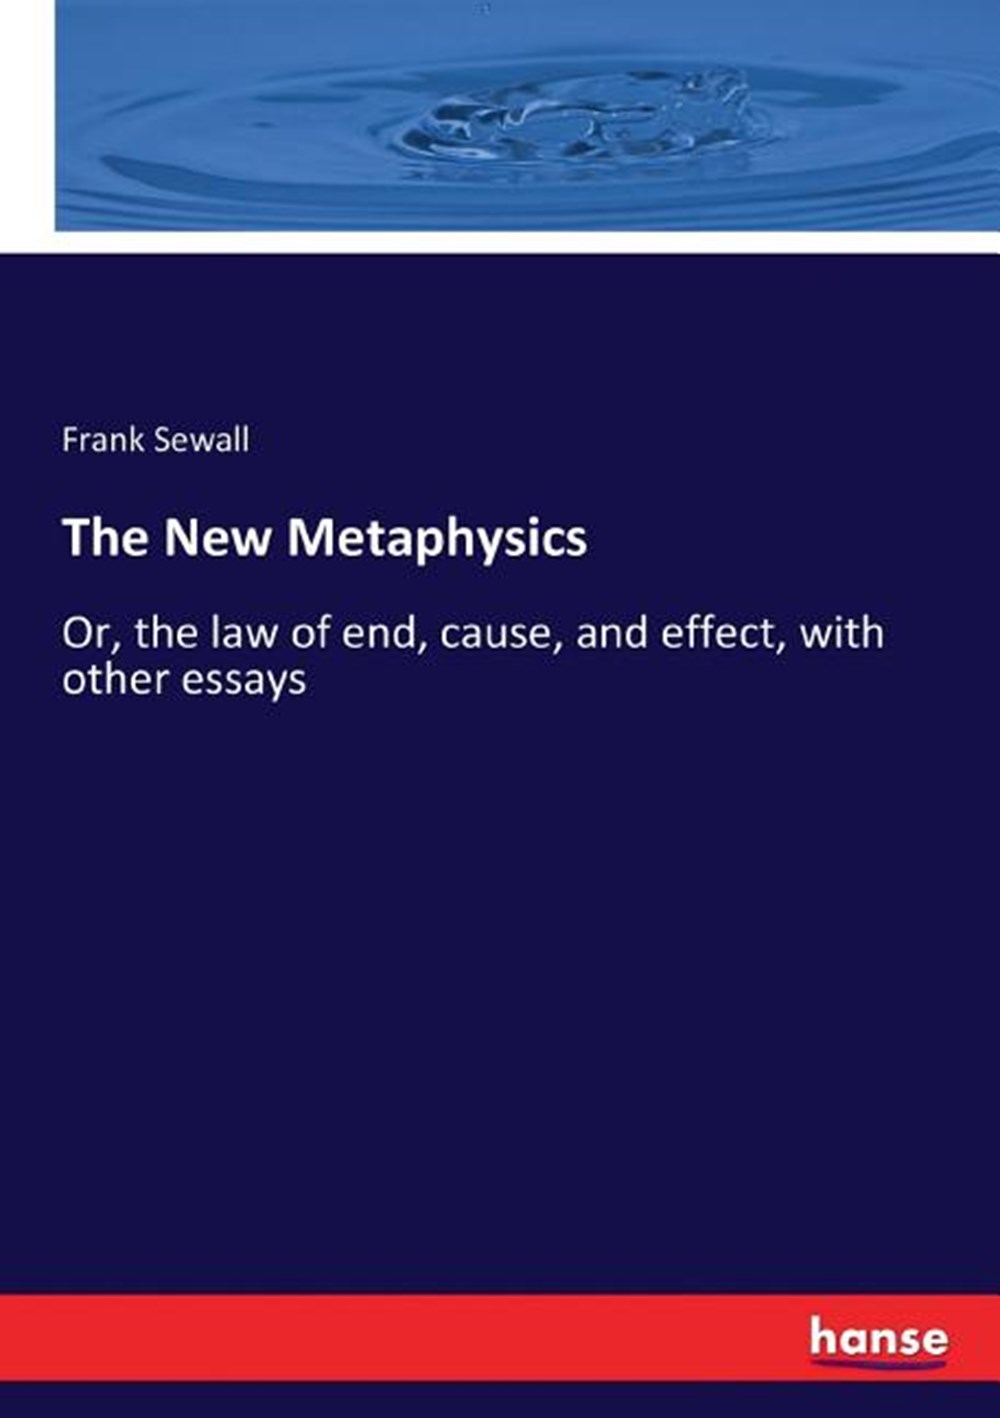 New Metaphysics: Or, the law of end, cause, and effect, with other essays